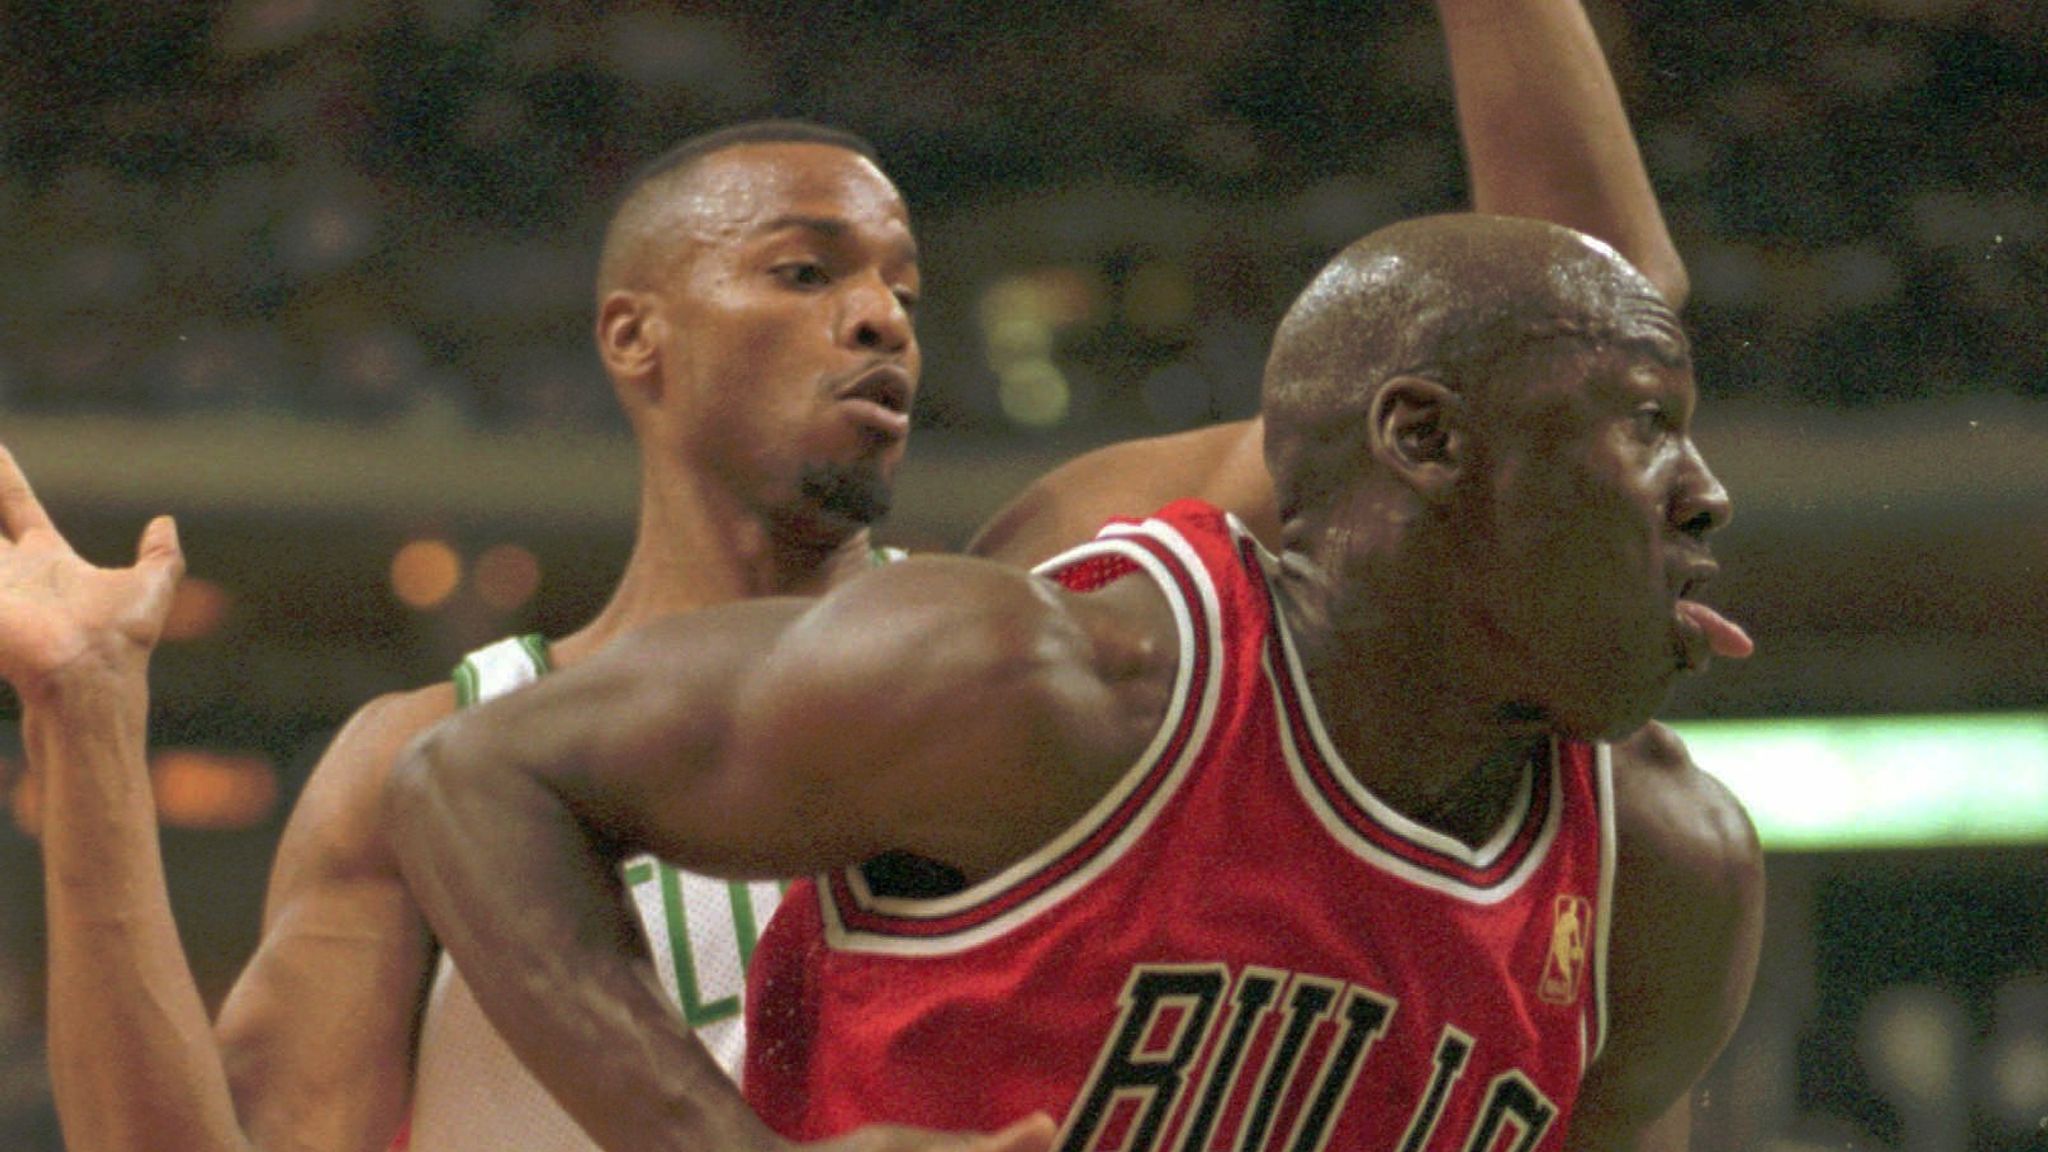 The 1996 Chicago Bulls were the greatest basketball team of all time